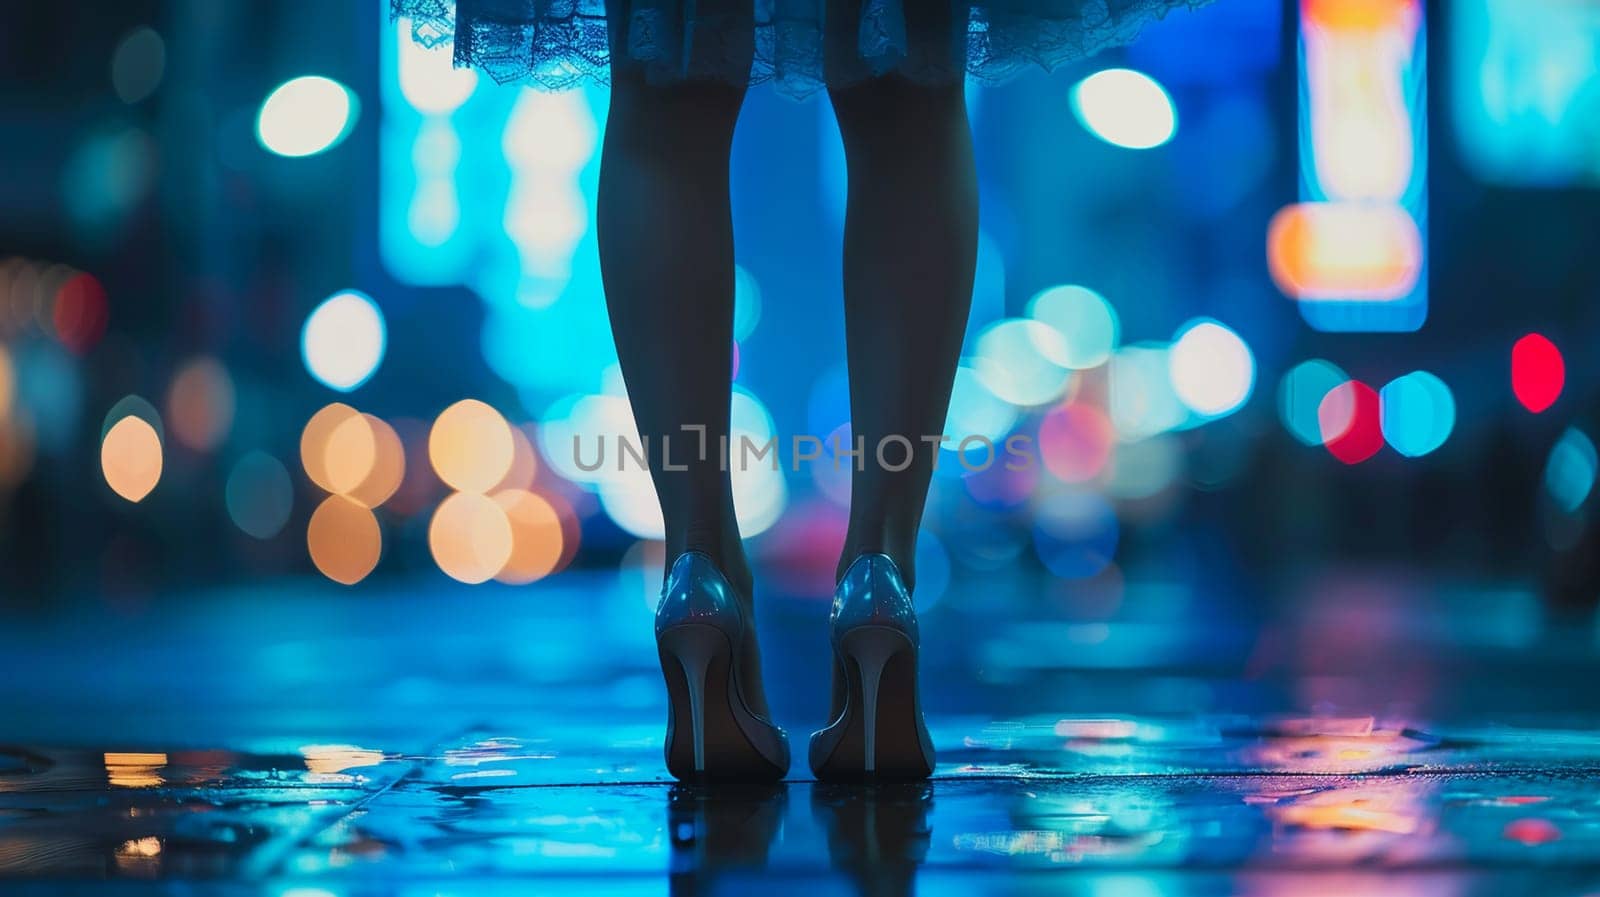 Elegance redefined slippery cityscape, close-up render glittering high heels lace details. Moody lighting blurs colors vibrant city lights.